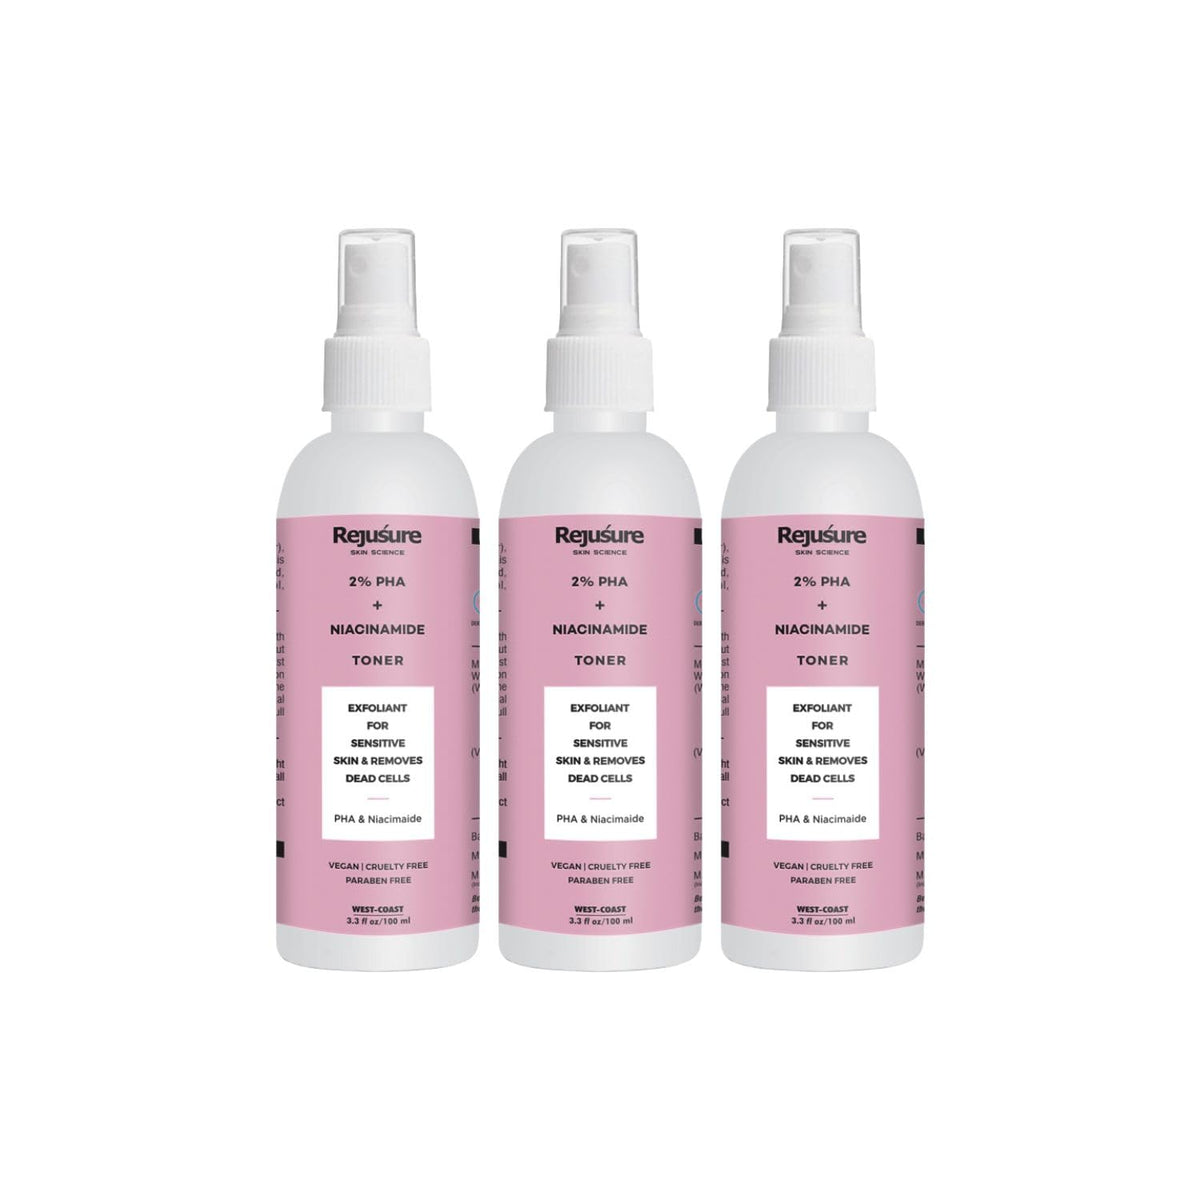 Rejusure PHA 2% + Niacinamide Alcohol Free Face Mist Toner For Mild Exfoliation & Pore Tightening Best for Oily & Normal Skin - 100ml (Pack of 3)